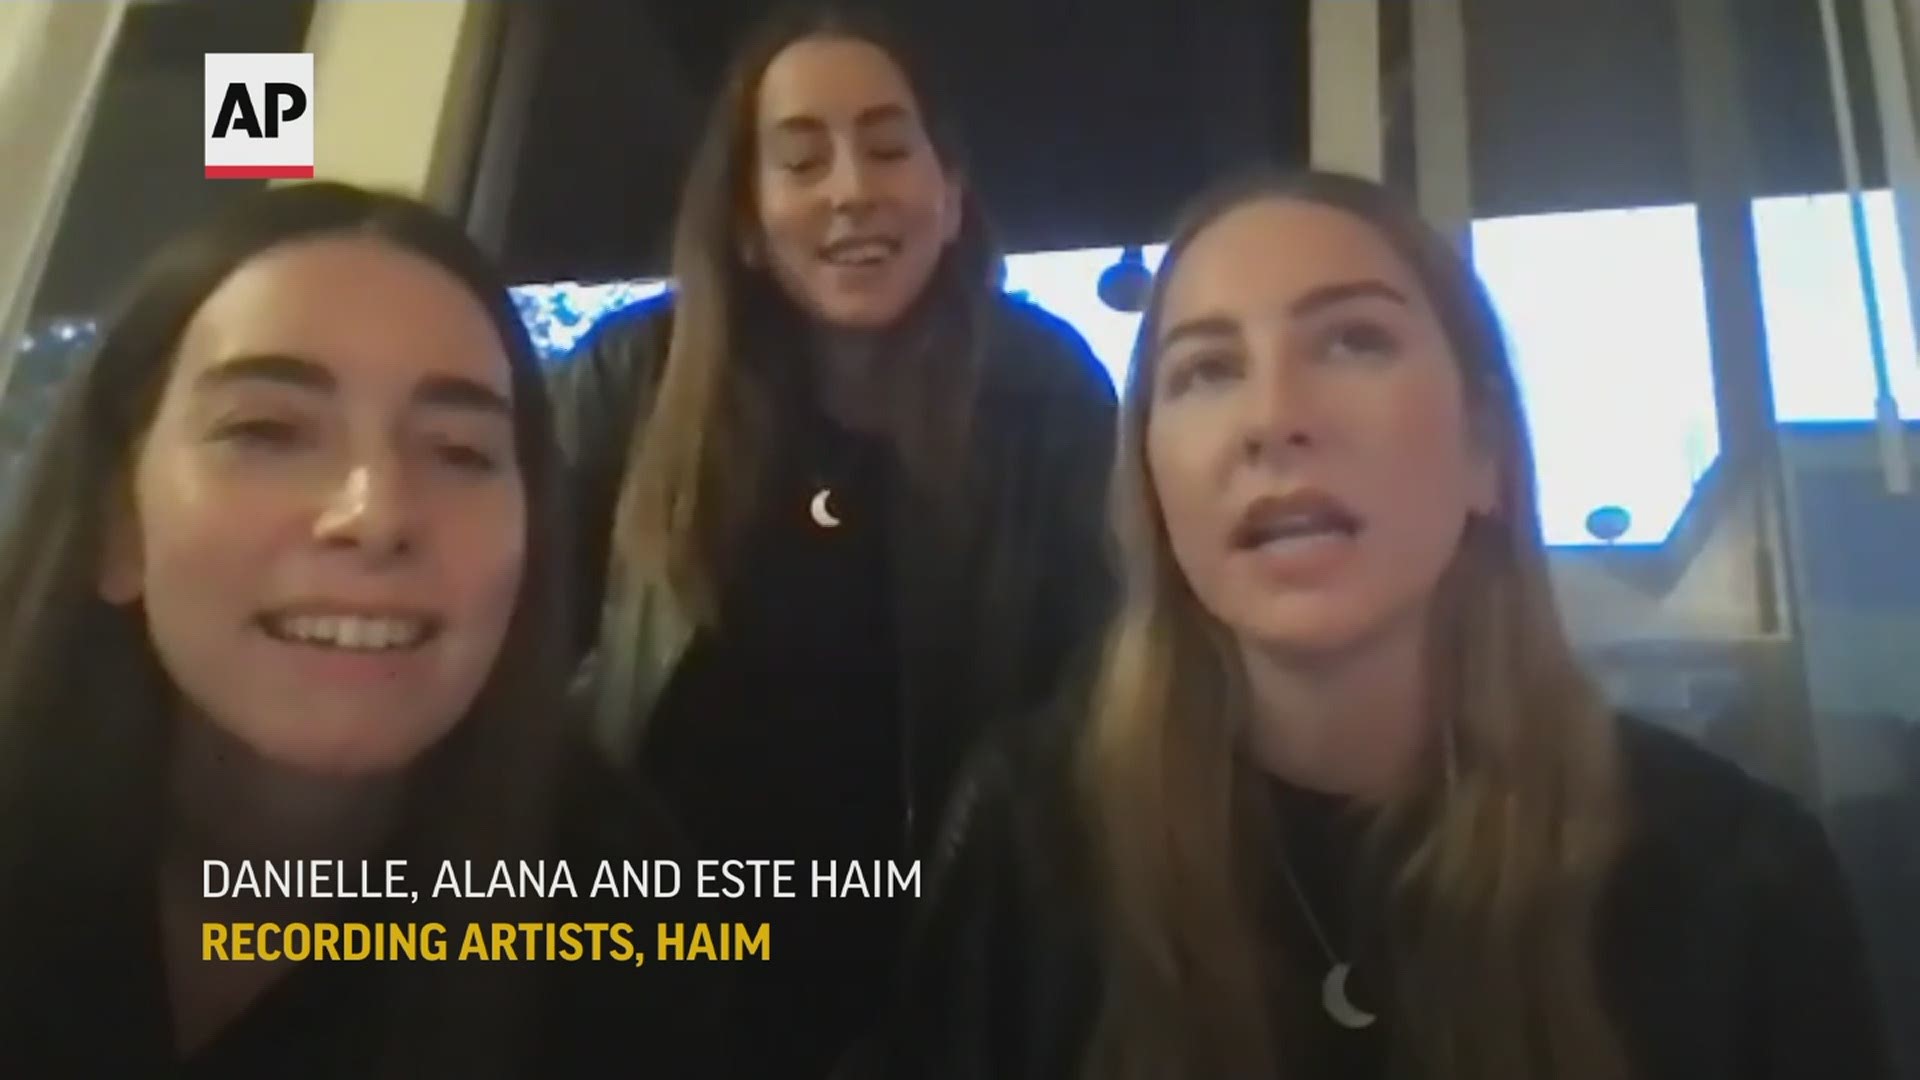 Pop-rock trio HAIM is nominated for two honors at the Grammys, including album of the year.